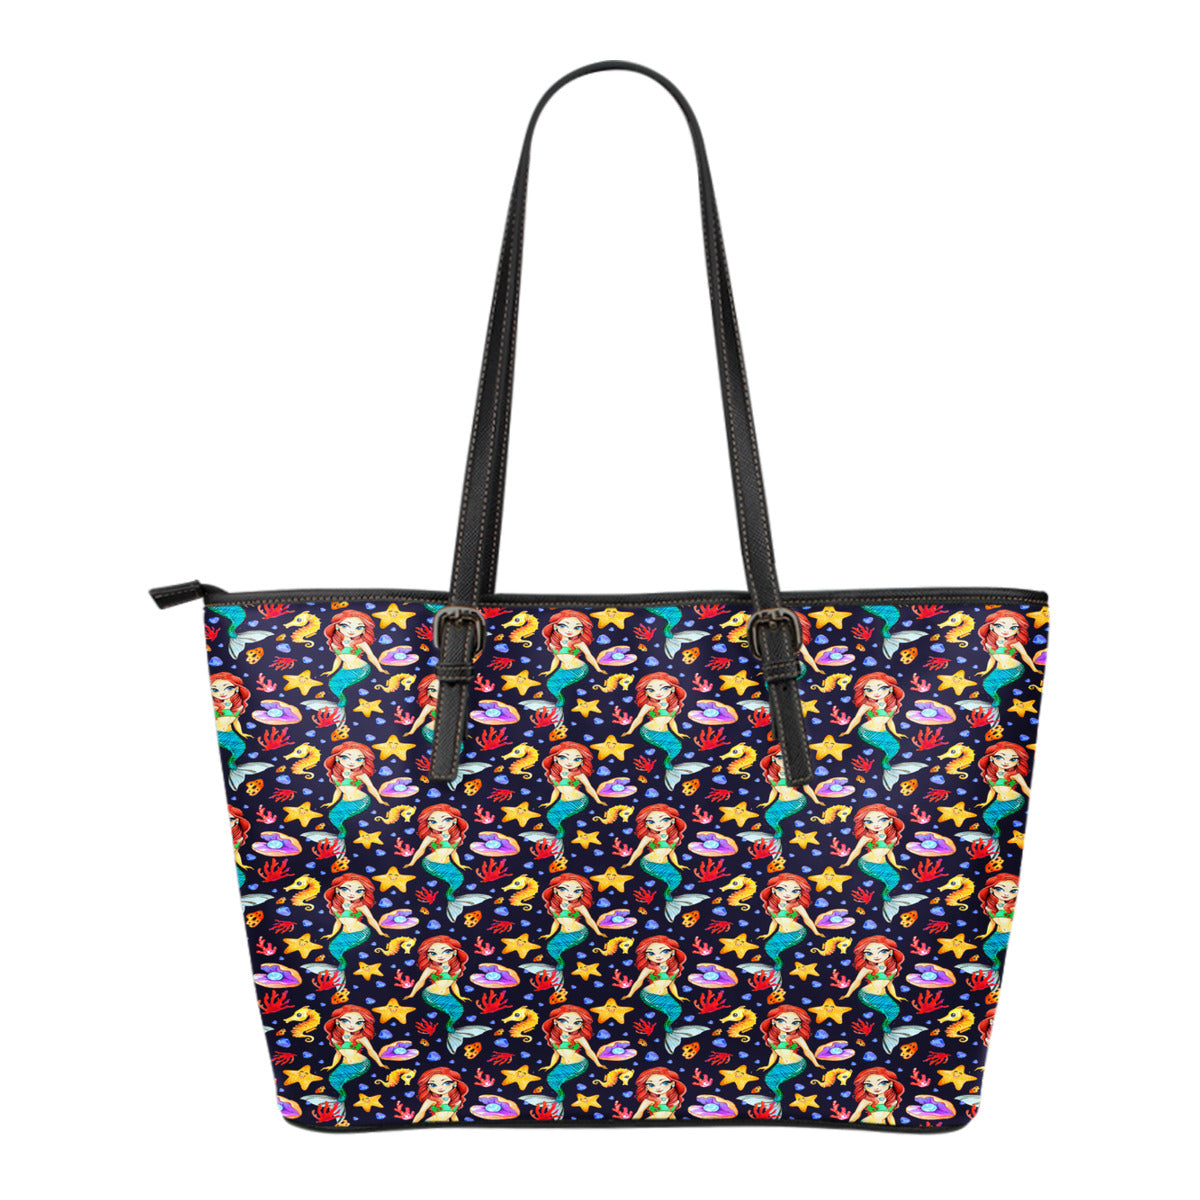 Mermaid Themed Design C13 Women Small Leather Tote Bag